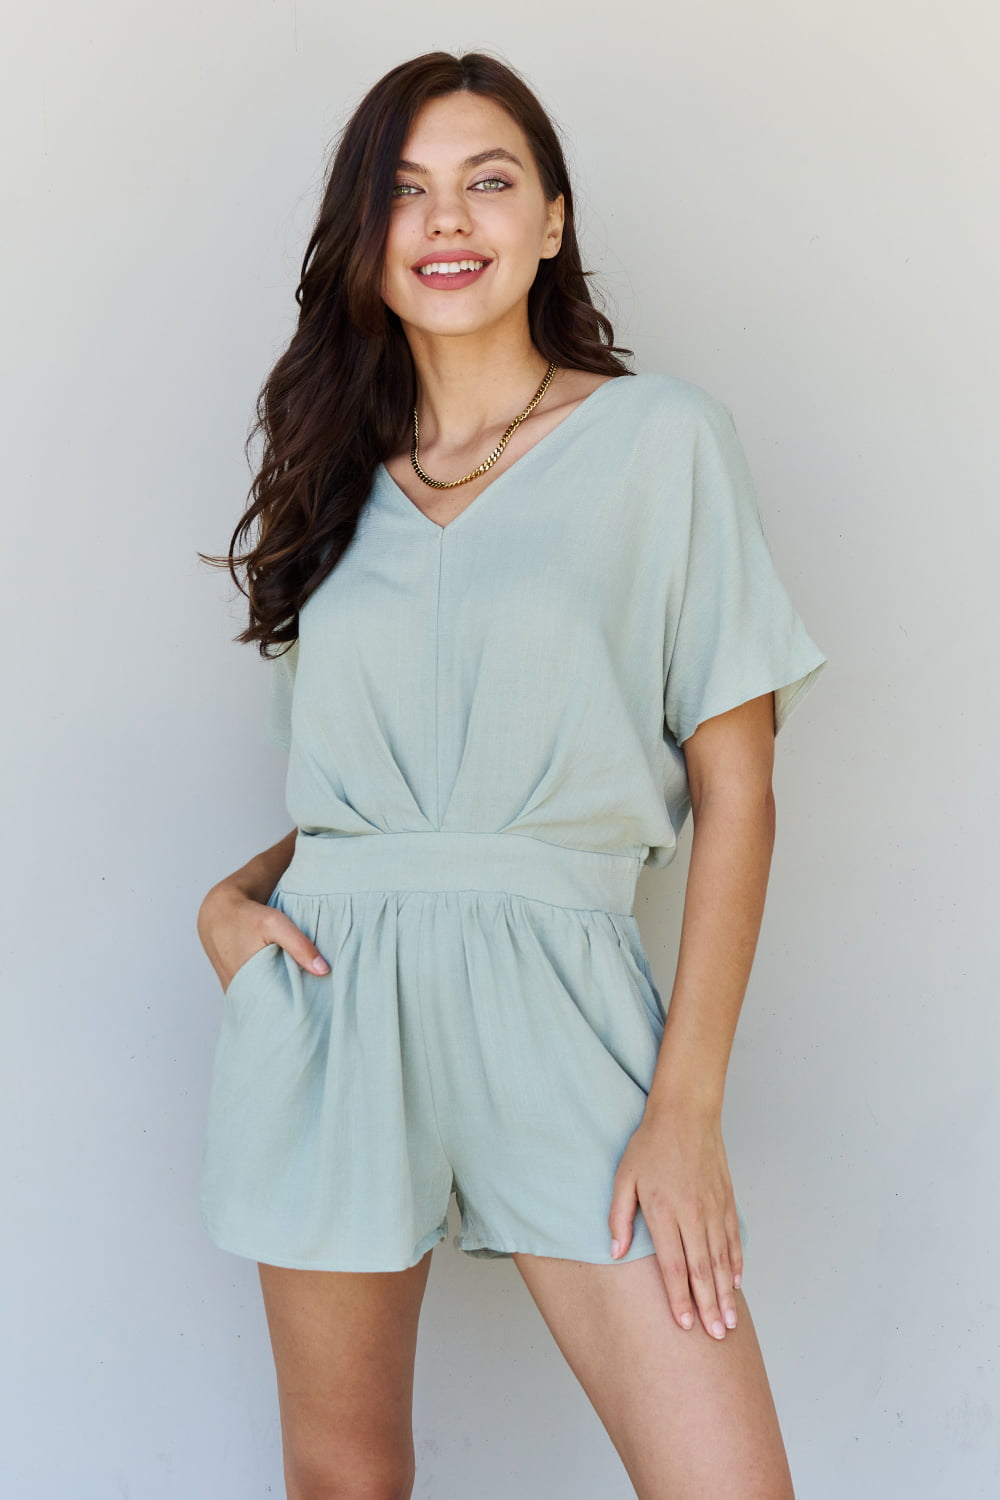 HEYSON Easy Going Front Pleated Romper in Cool Matcha